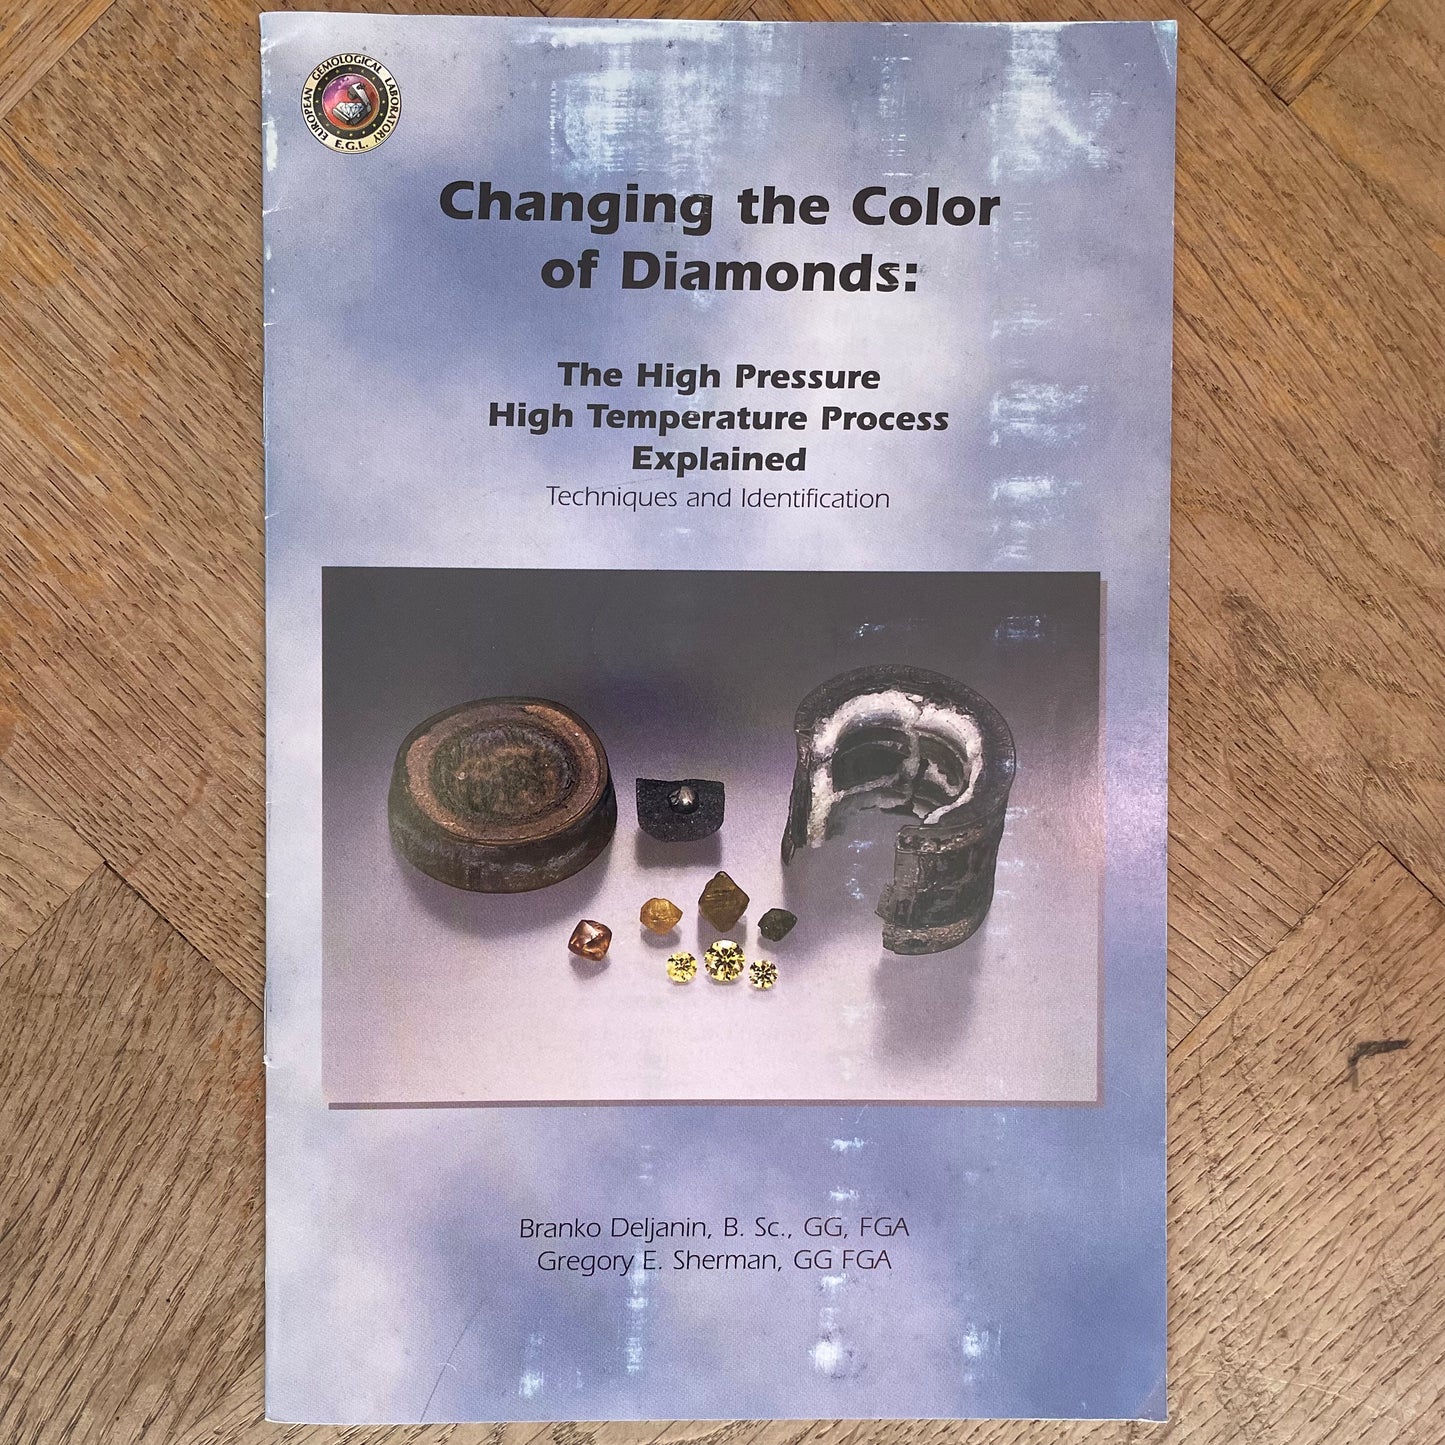 Changing the Color of Diamonds: The High Pressure High Temperature Process Explained